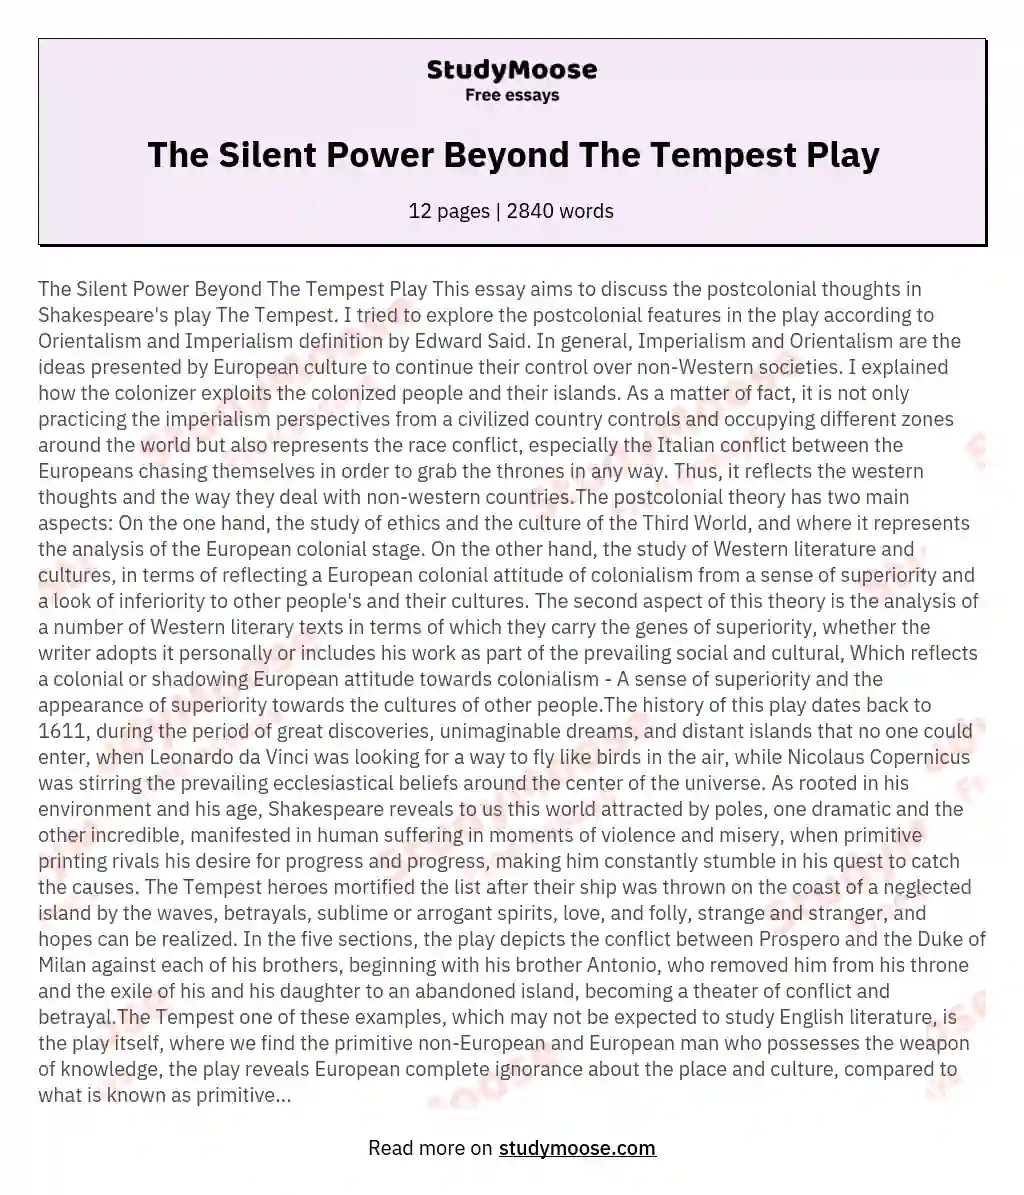 The Silent Power Beyond The Tempest Play essay